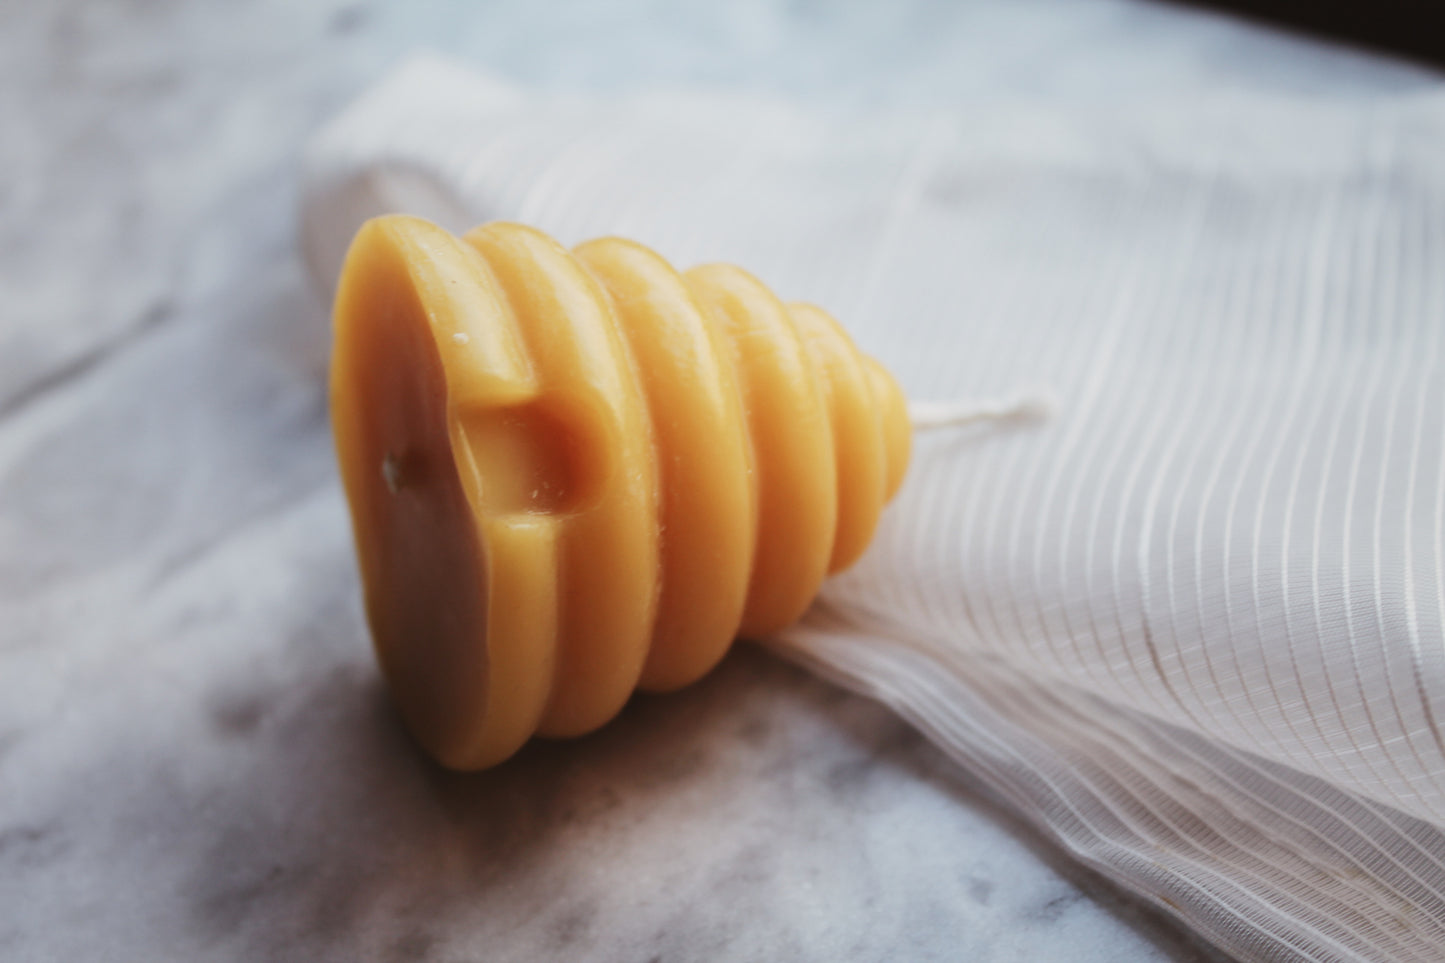 100% Pure Beeswax Mini Skep Votive Candle